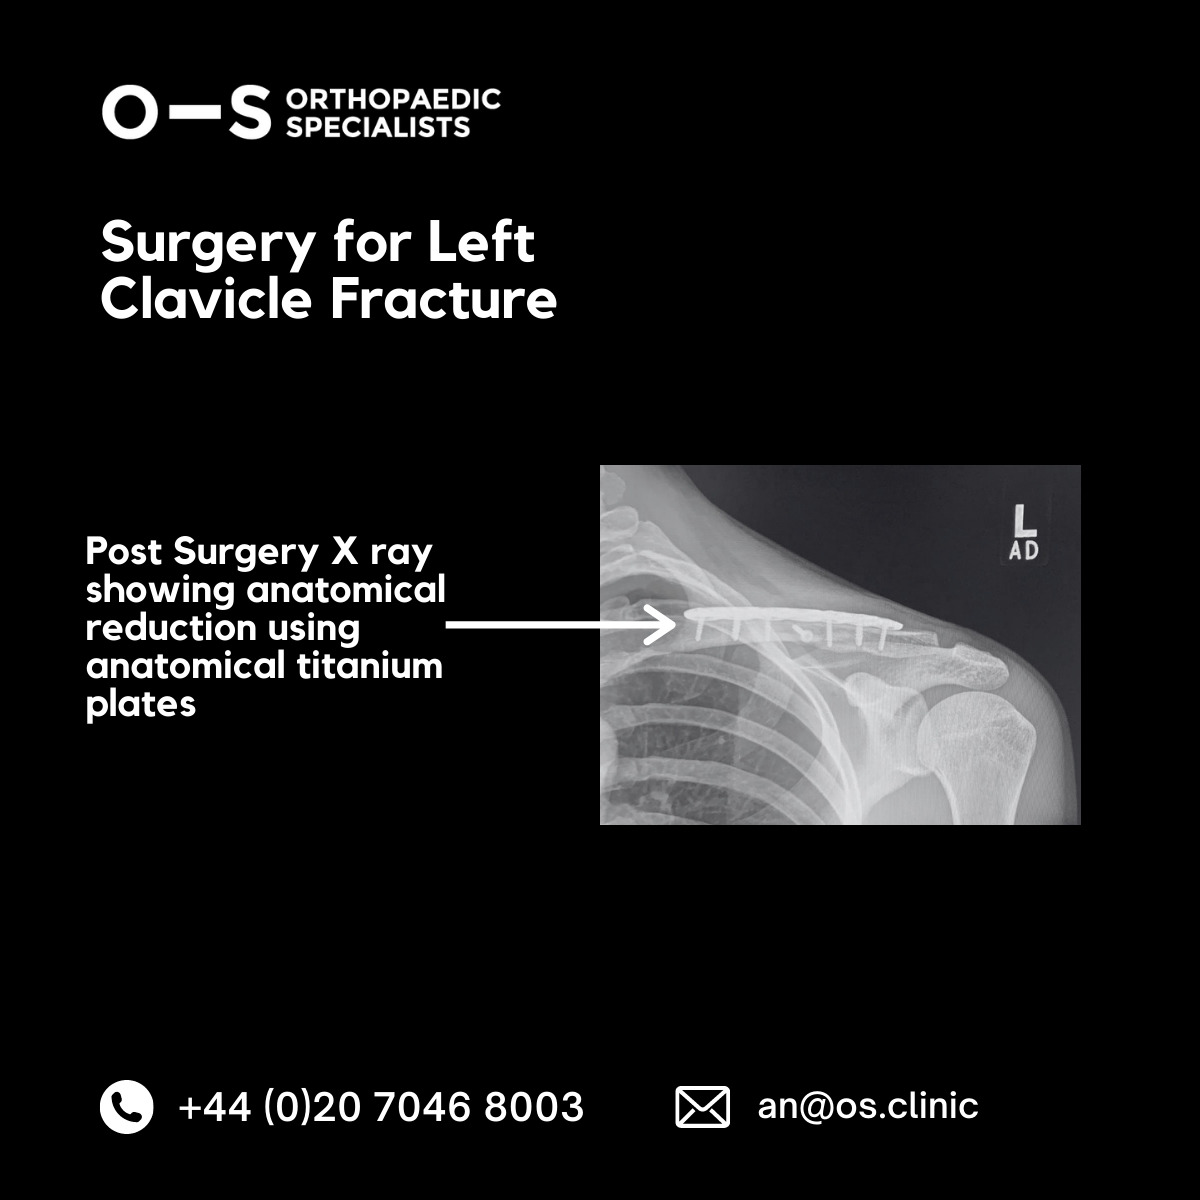 Post-surgery xray - surgery for left clavicle fracture